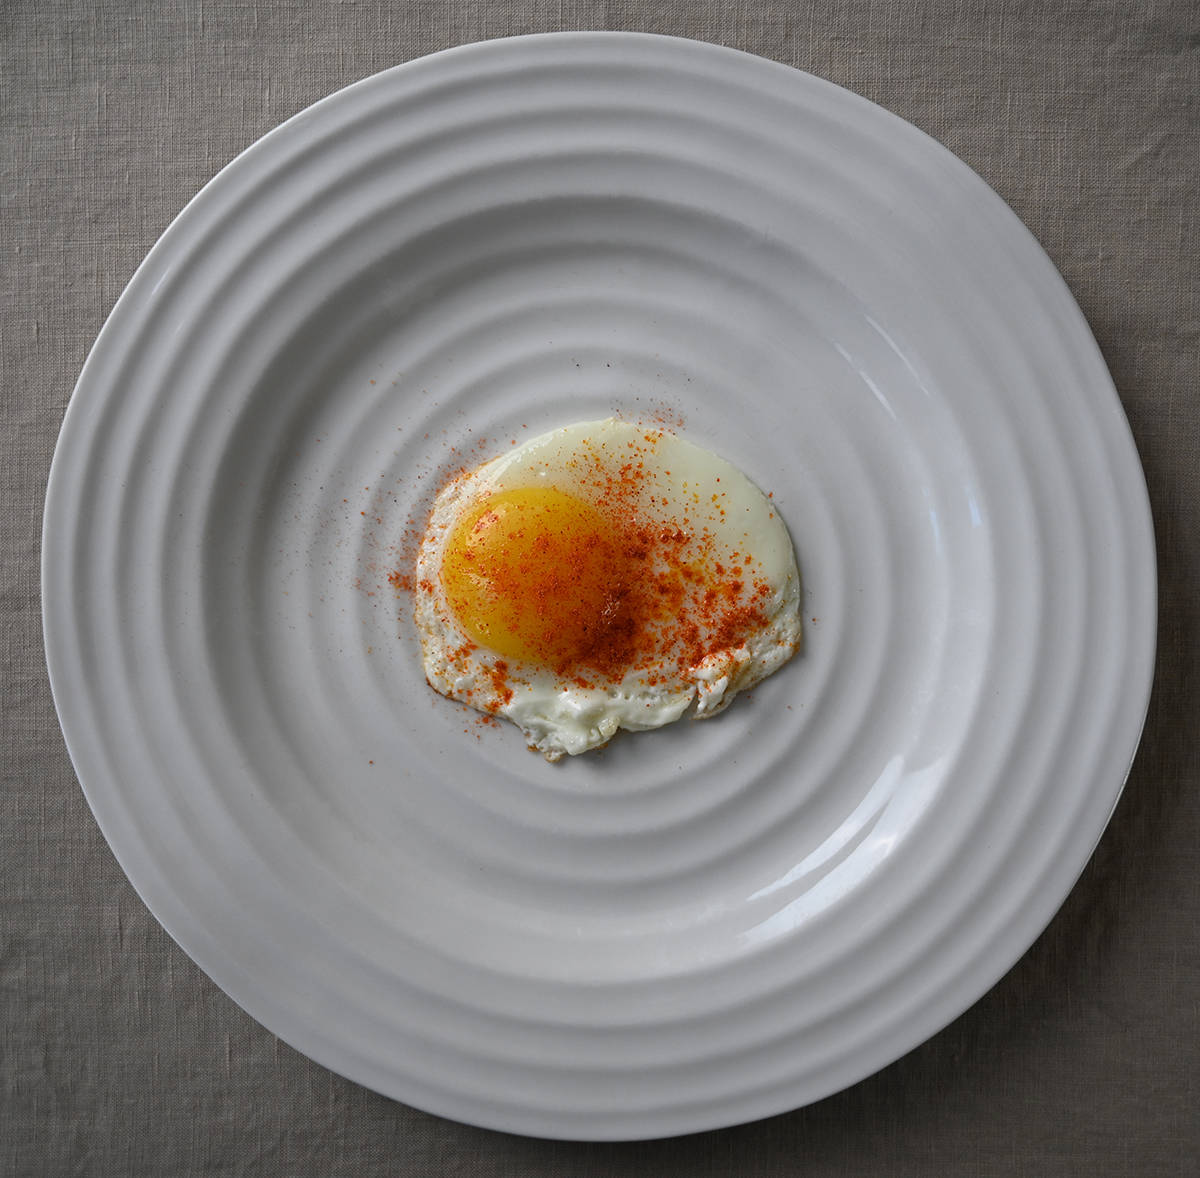 Top down image of a sunny side up egg with sriracha seasoning sprinkled on it.